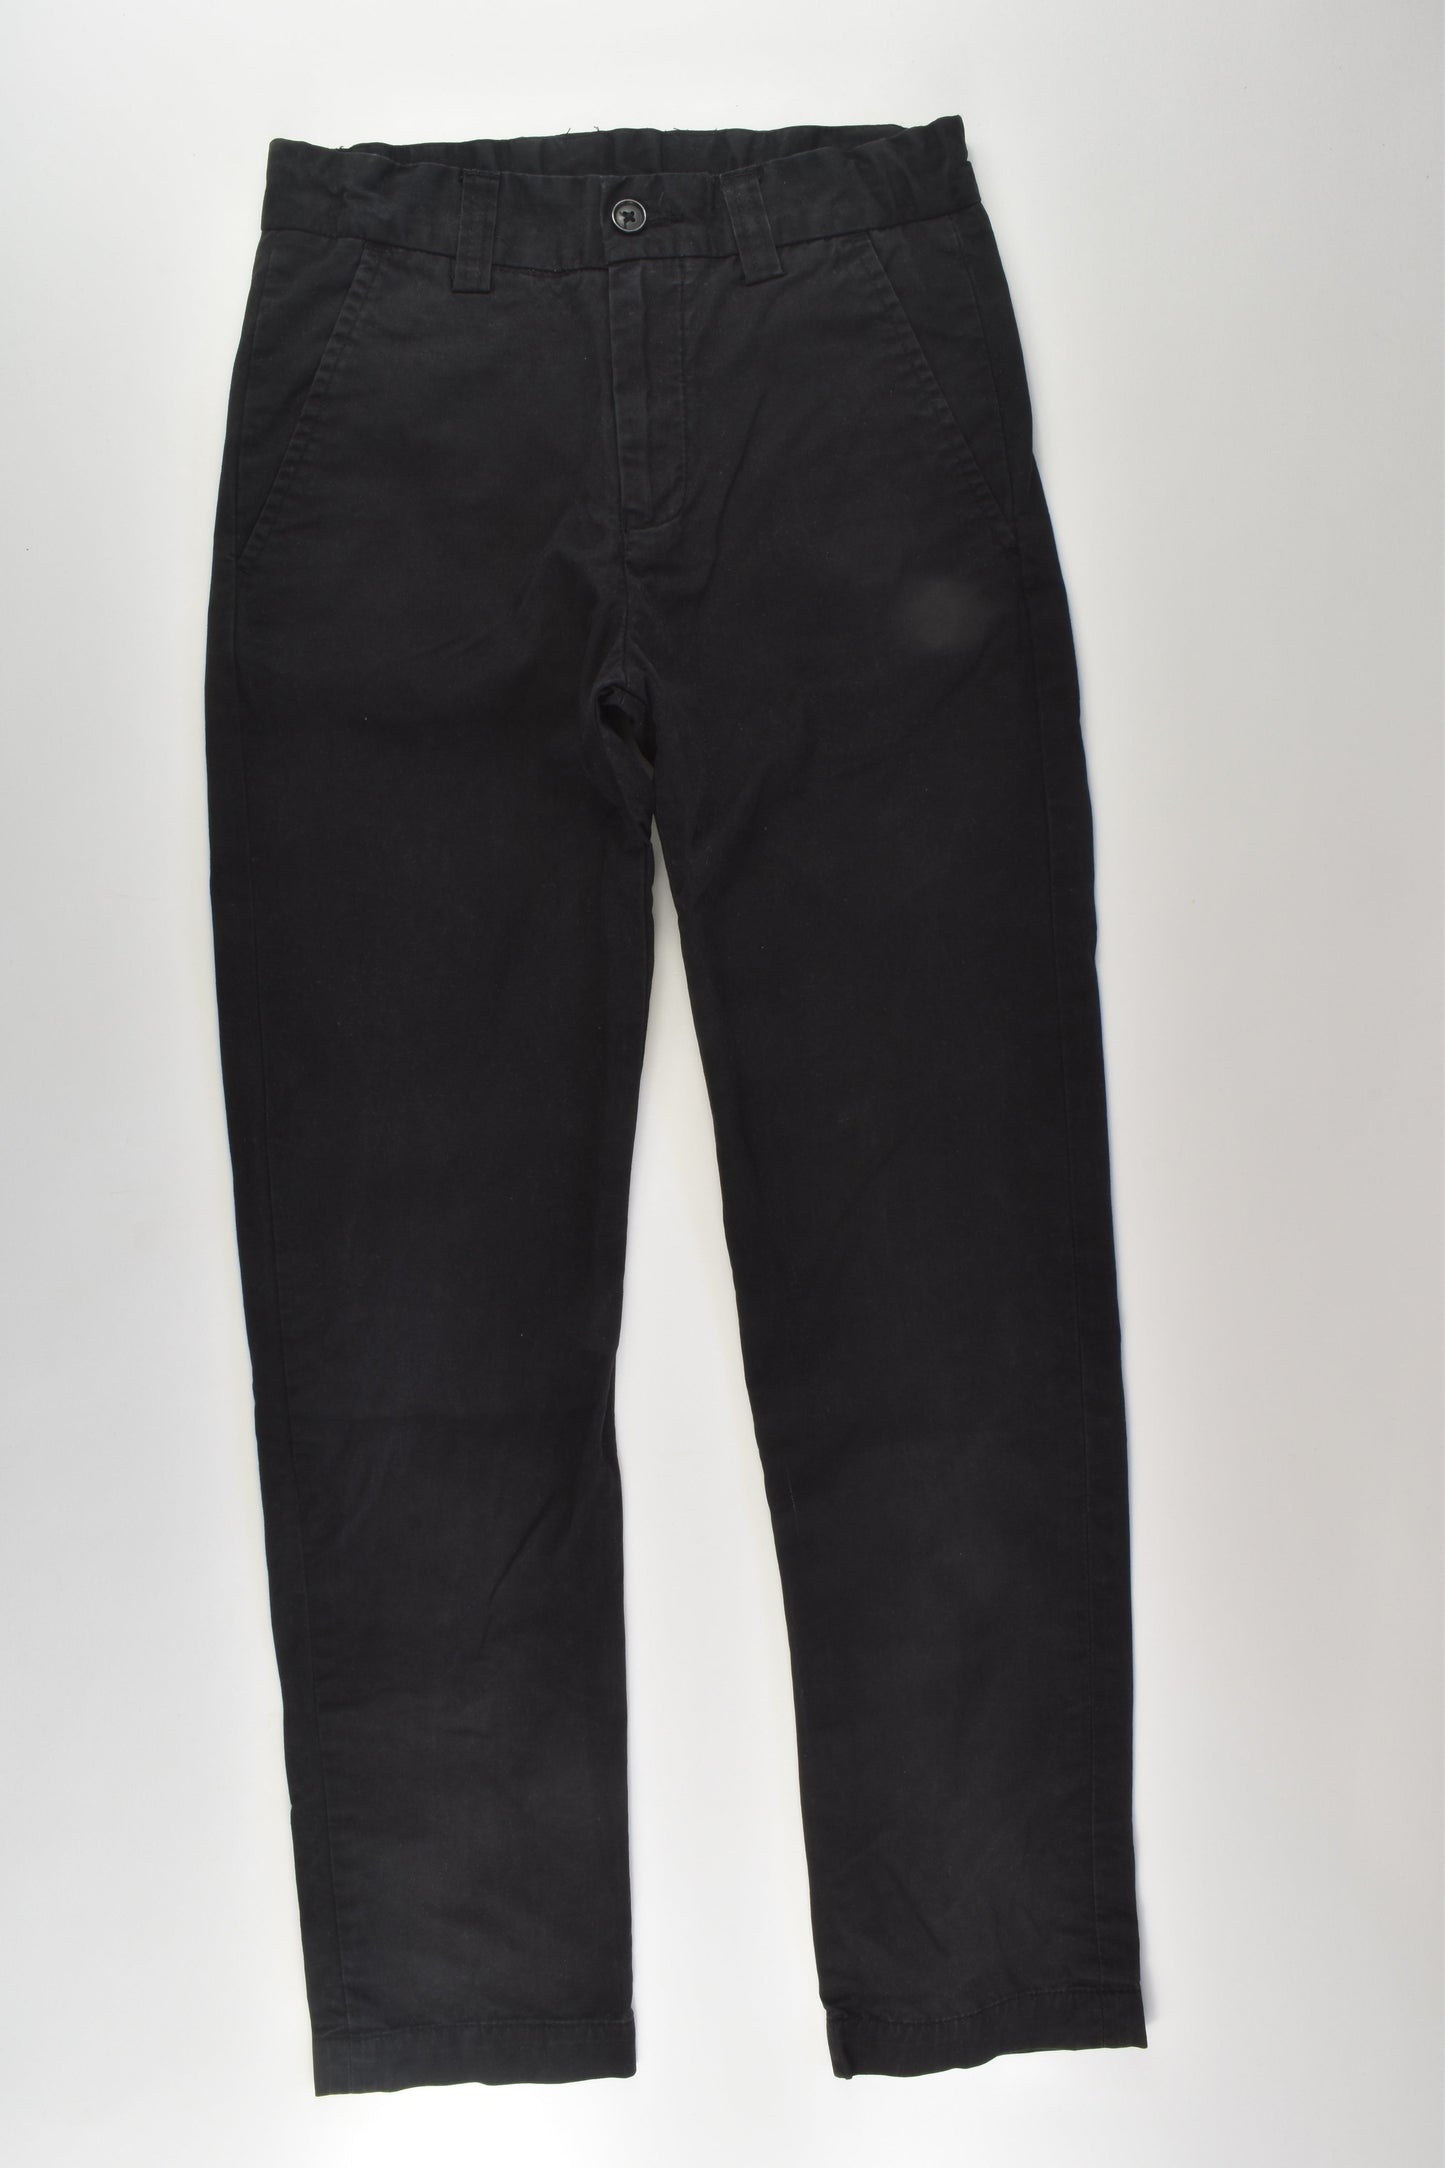 Brooklyn Industries Size 8 Chino Pants